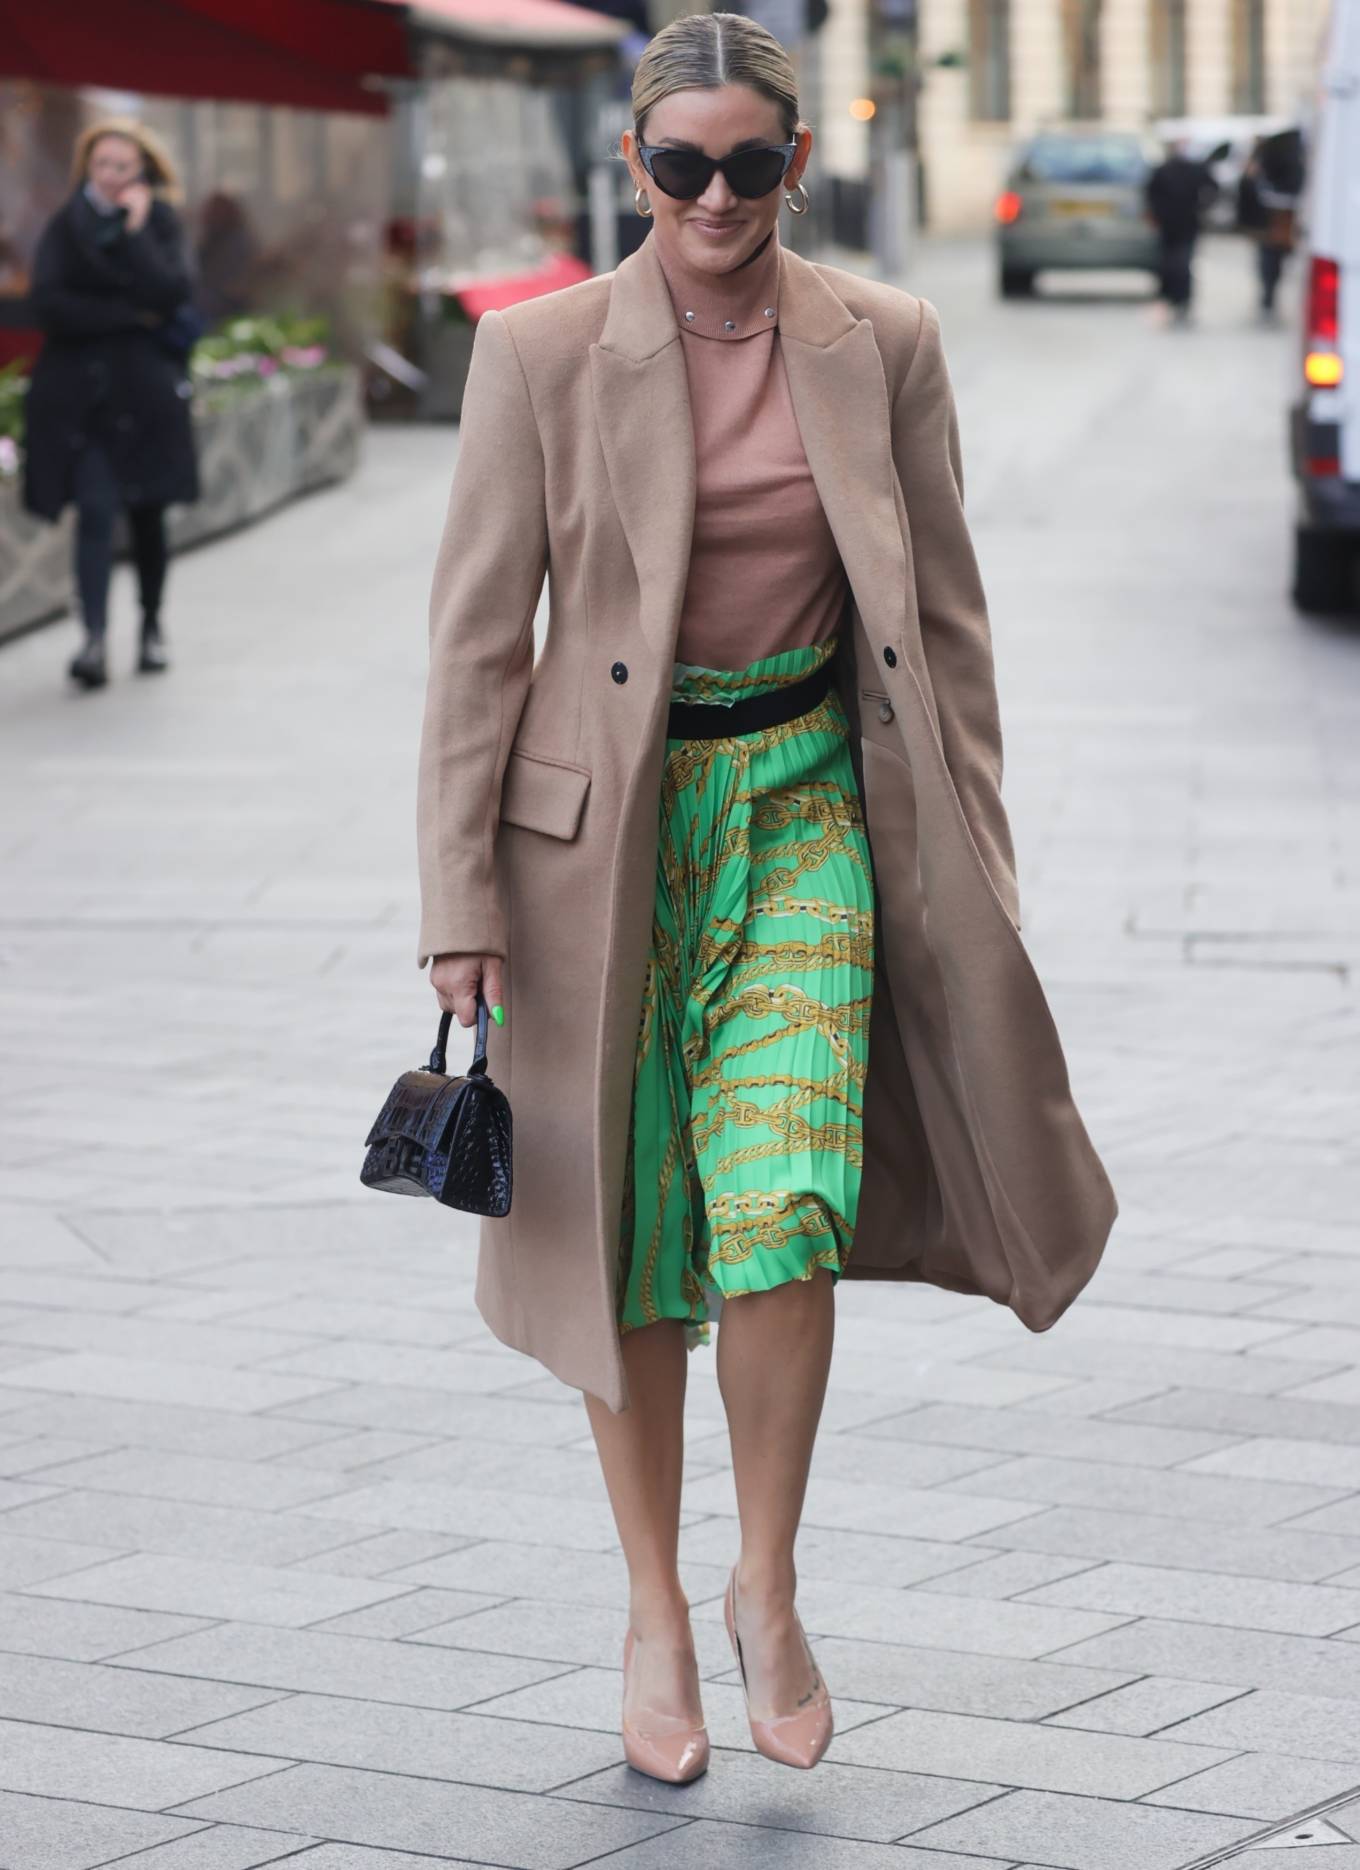 Ashley Roberts 2021 : Ashley Roberts – Wears festive green skirt stepping out from Heart radio in London-04